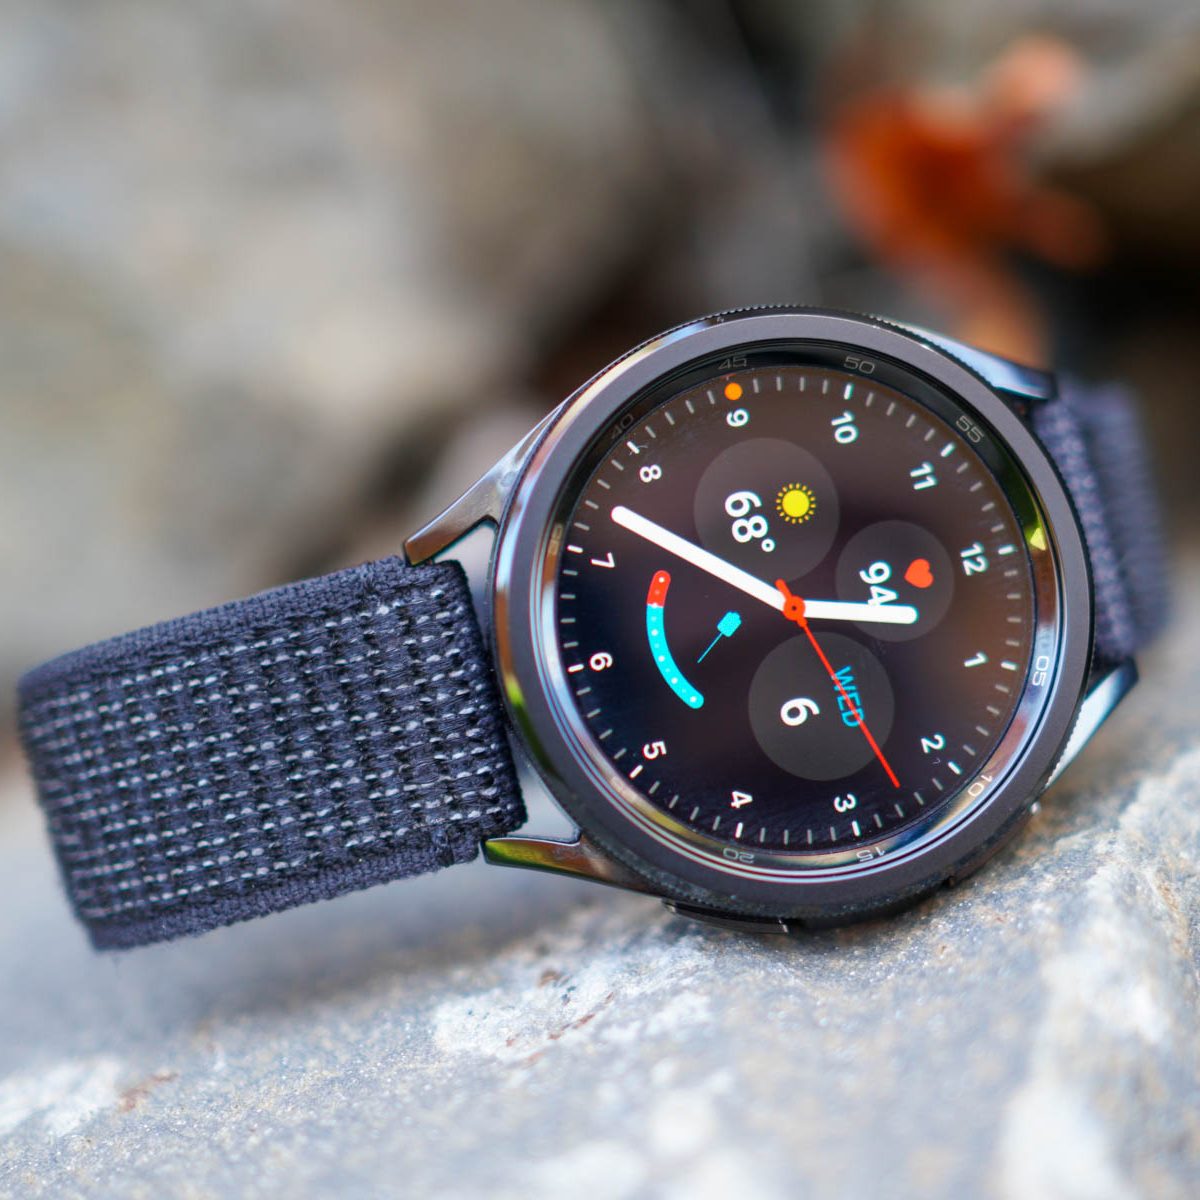 I'd love to buy a Galaxy Watch 6, but it isn't the smartwatch for me